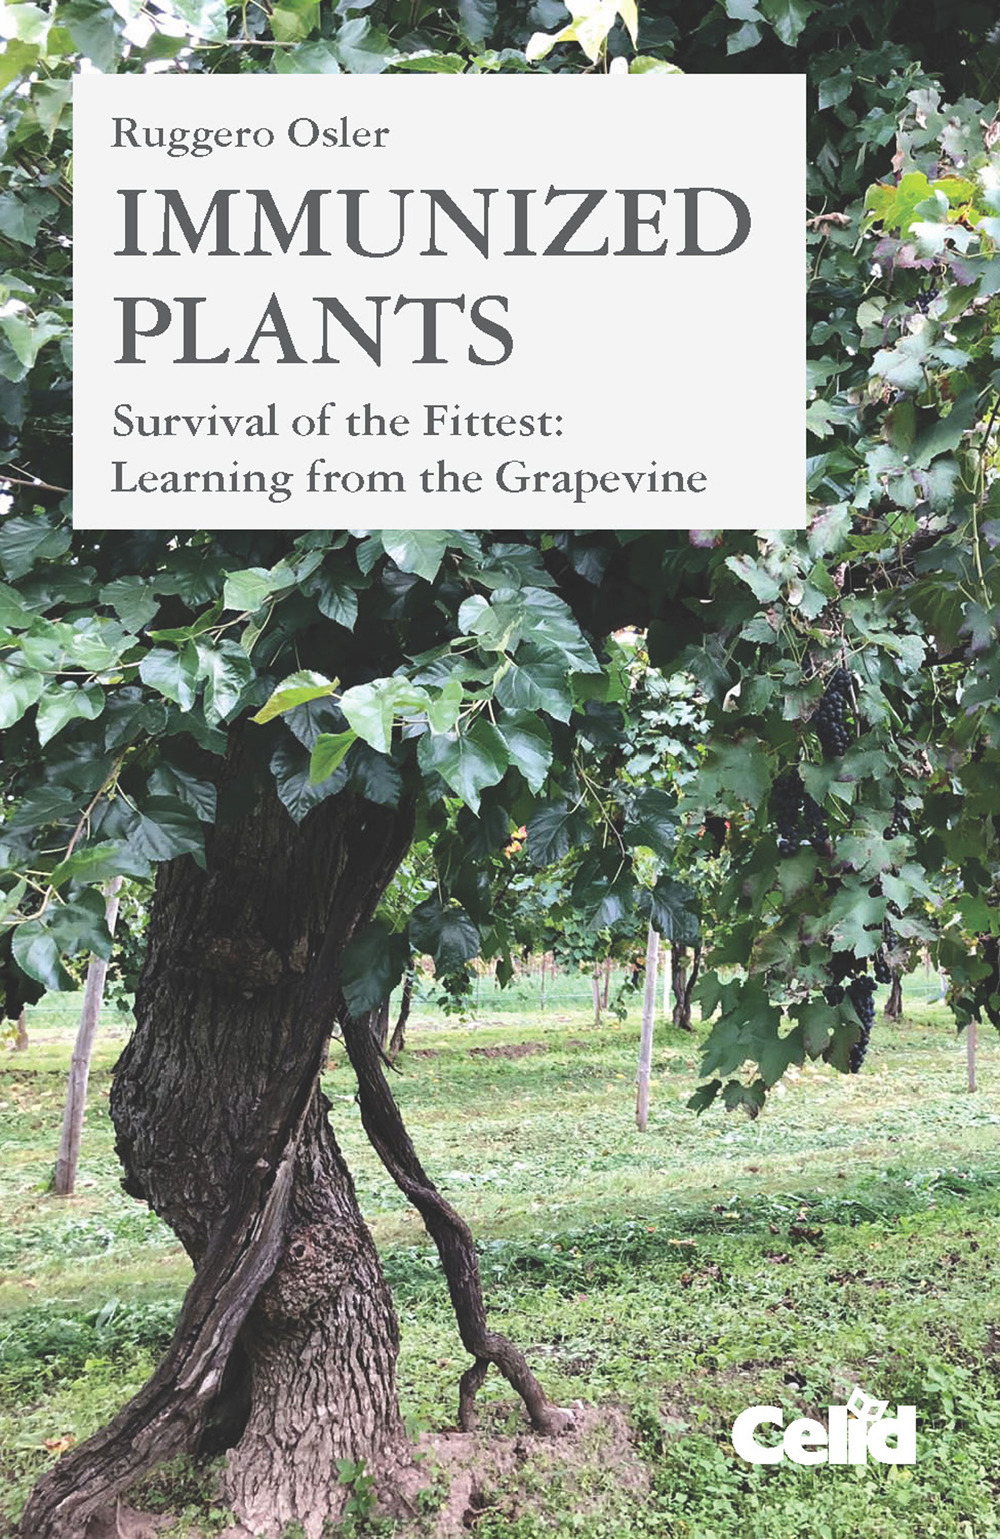 Immunized plants. Survival of the fittest: learning from the grapevine